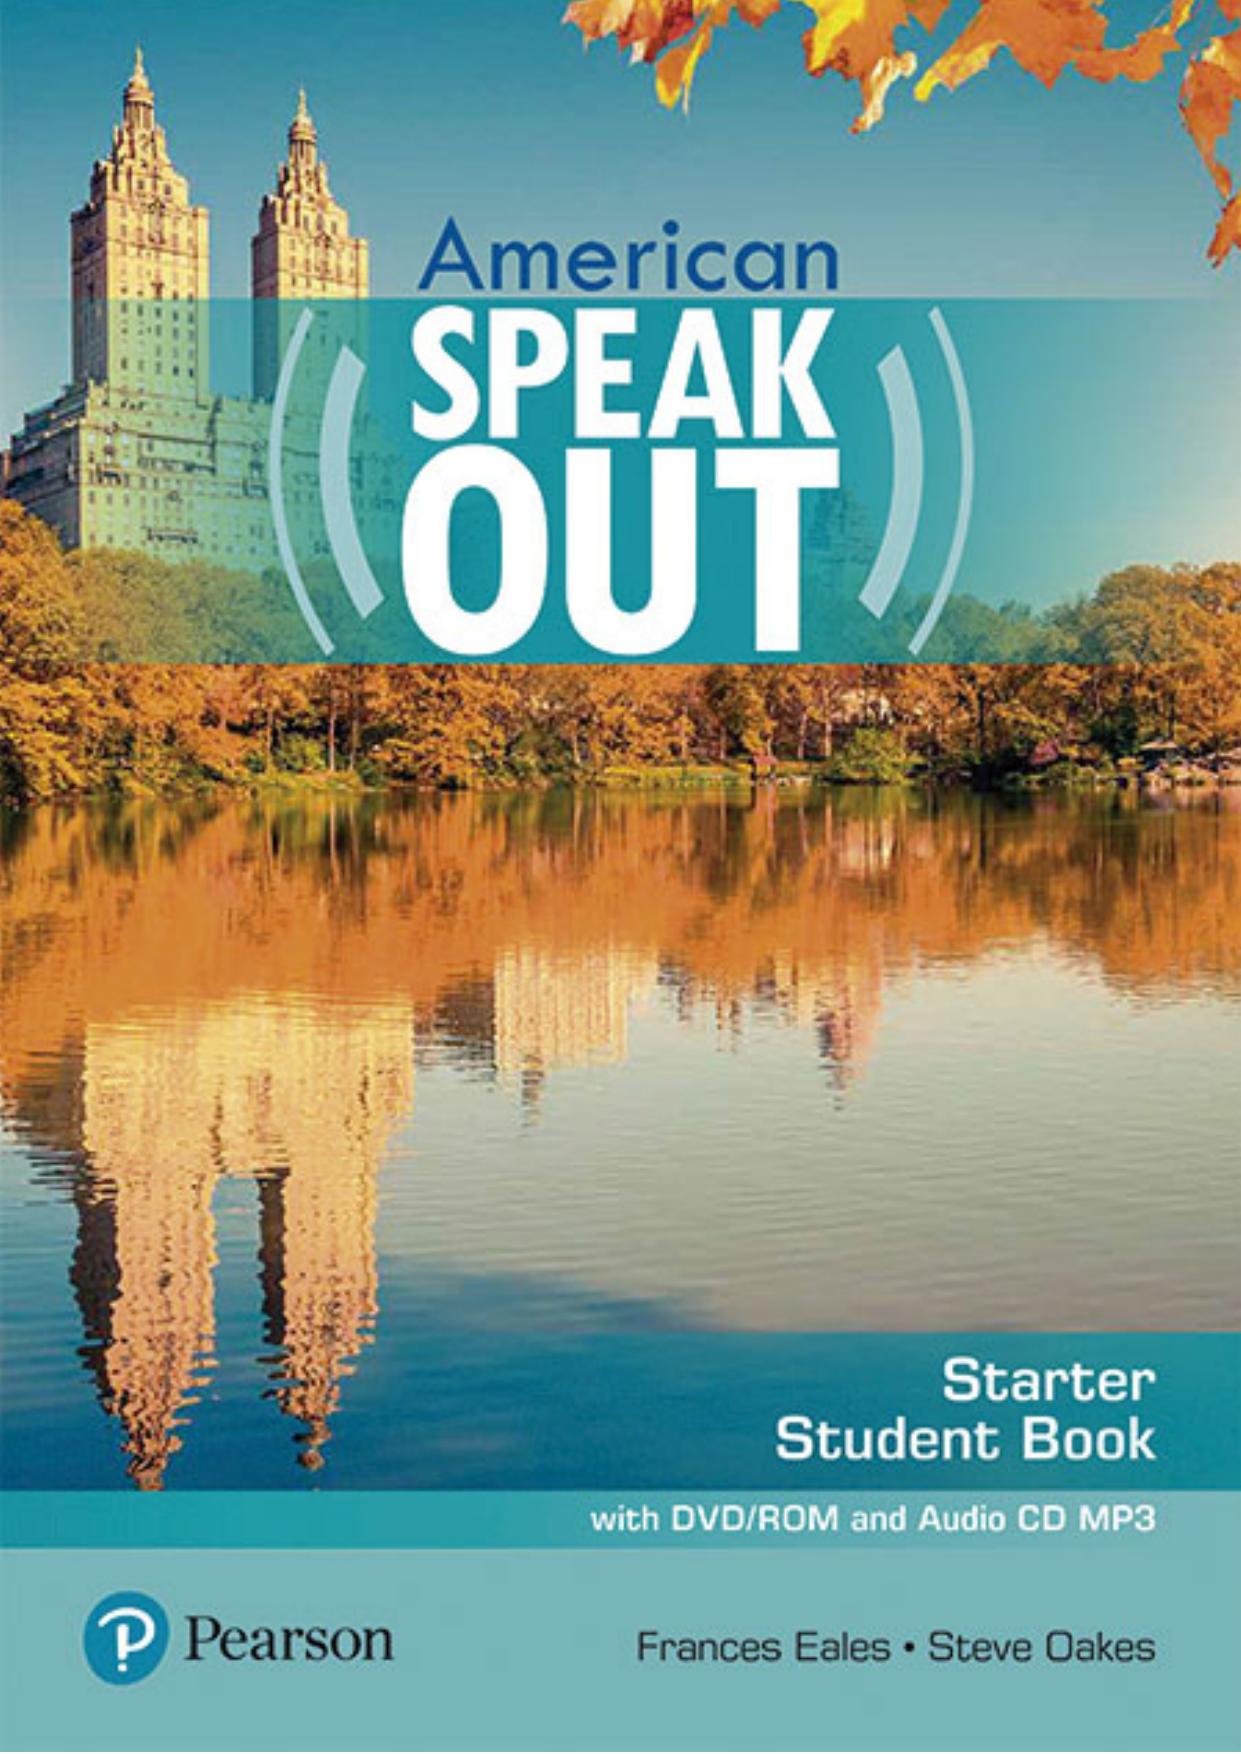 American Speakout Starter Student Book by Frances Eales